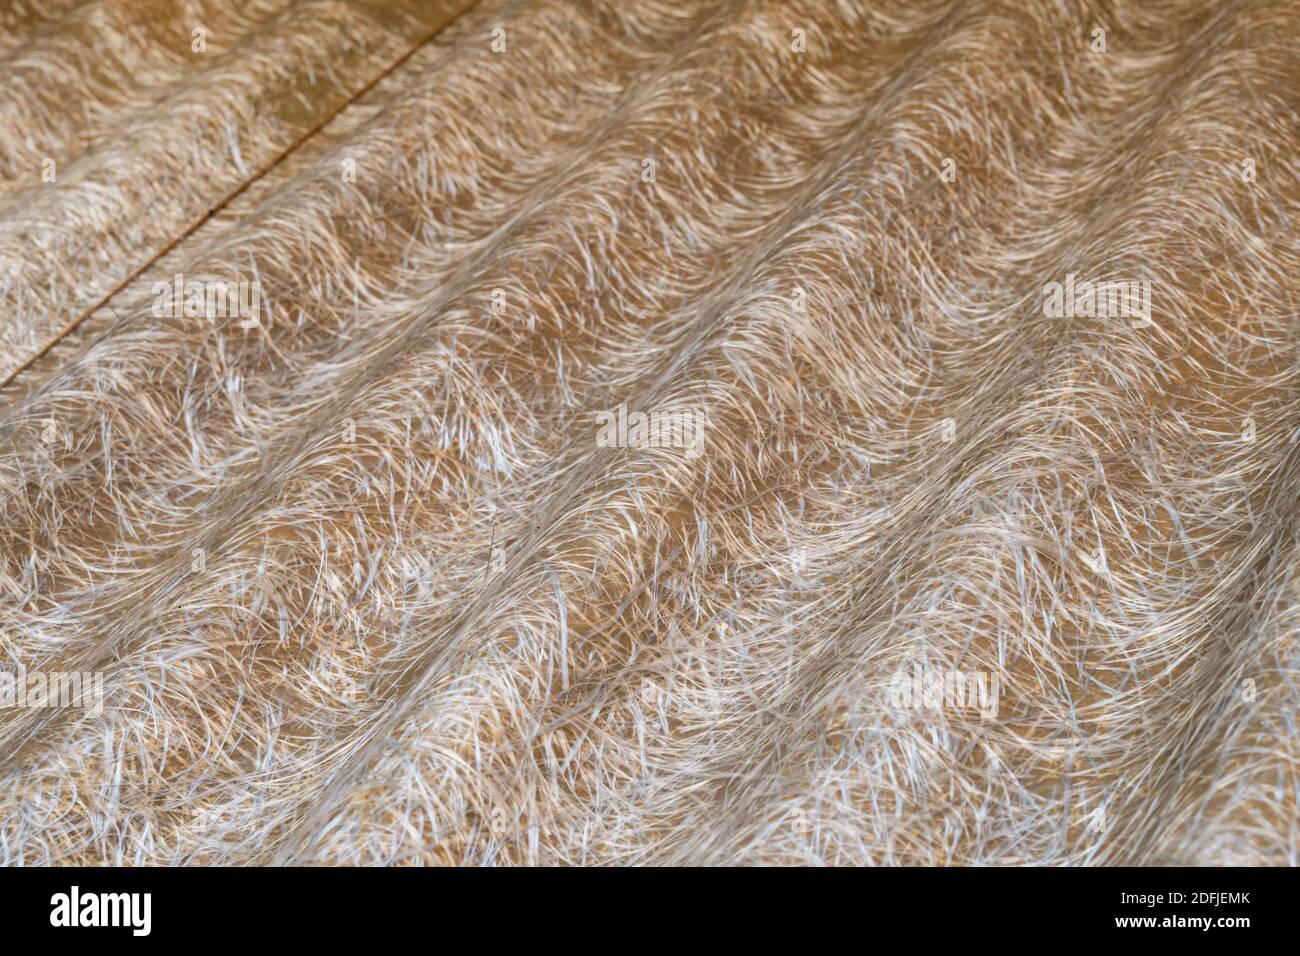 old fiberglass corrugated roofing Stock Photo